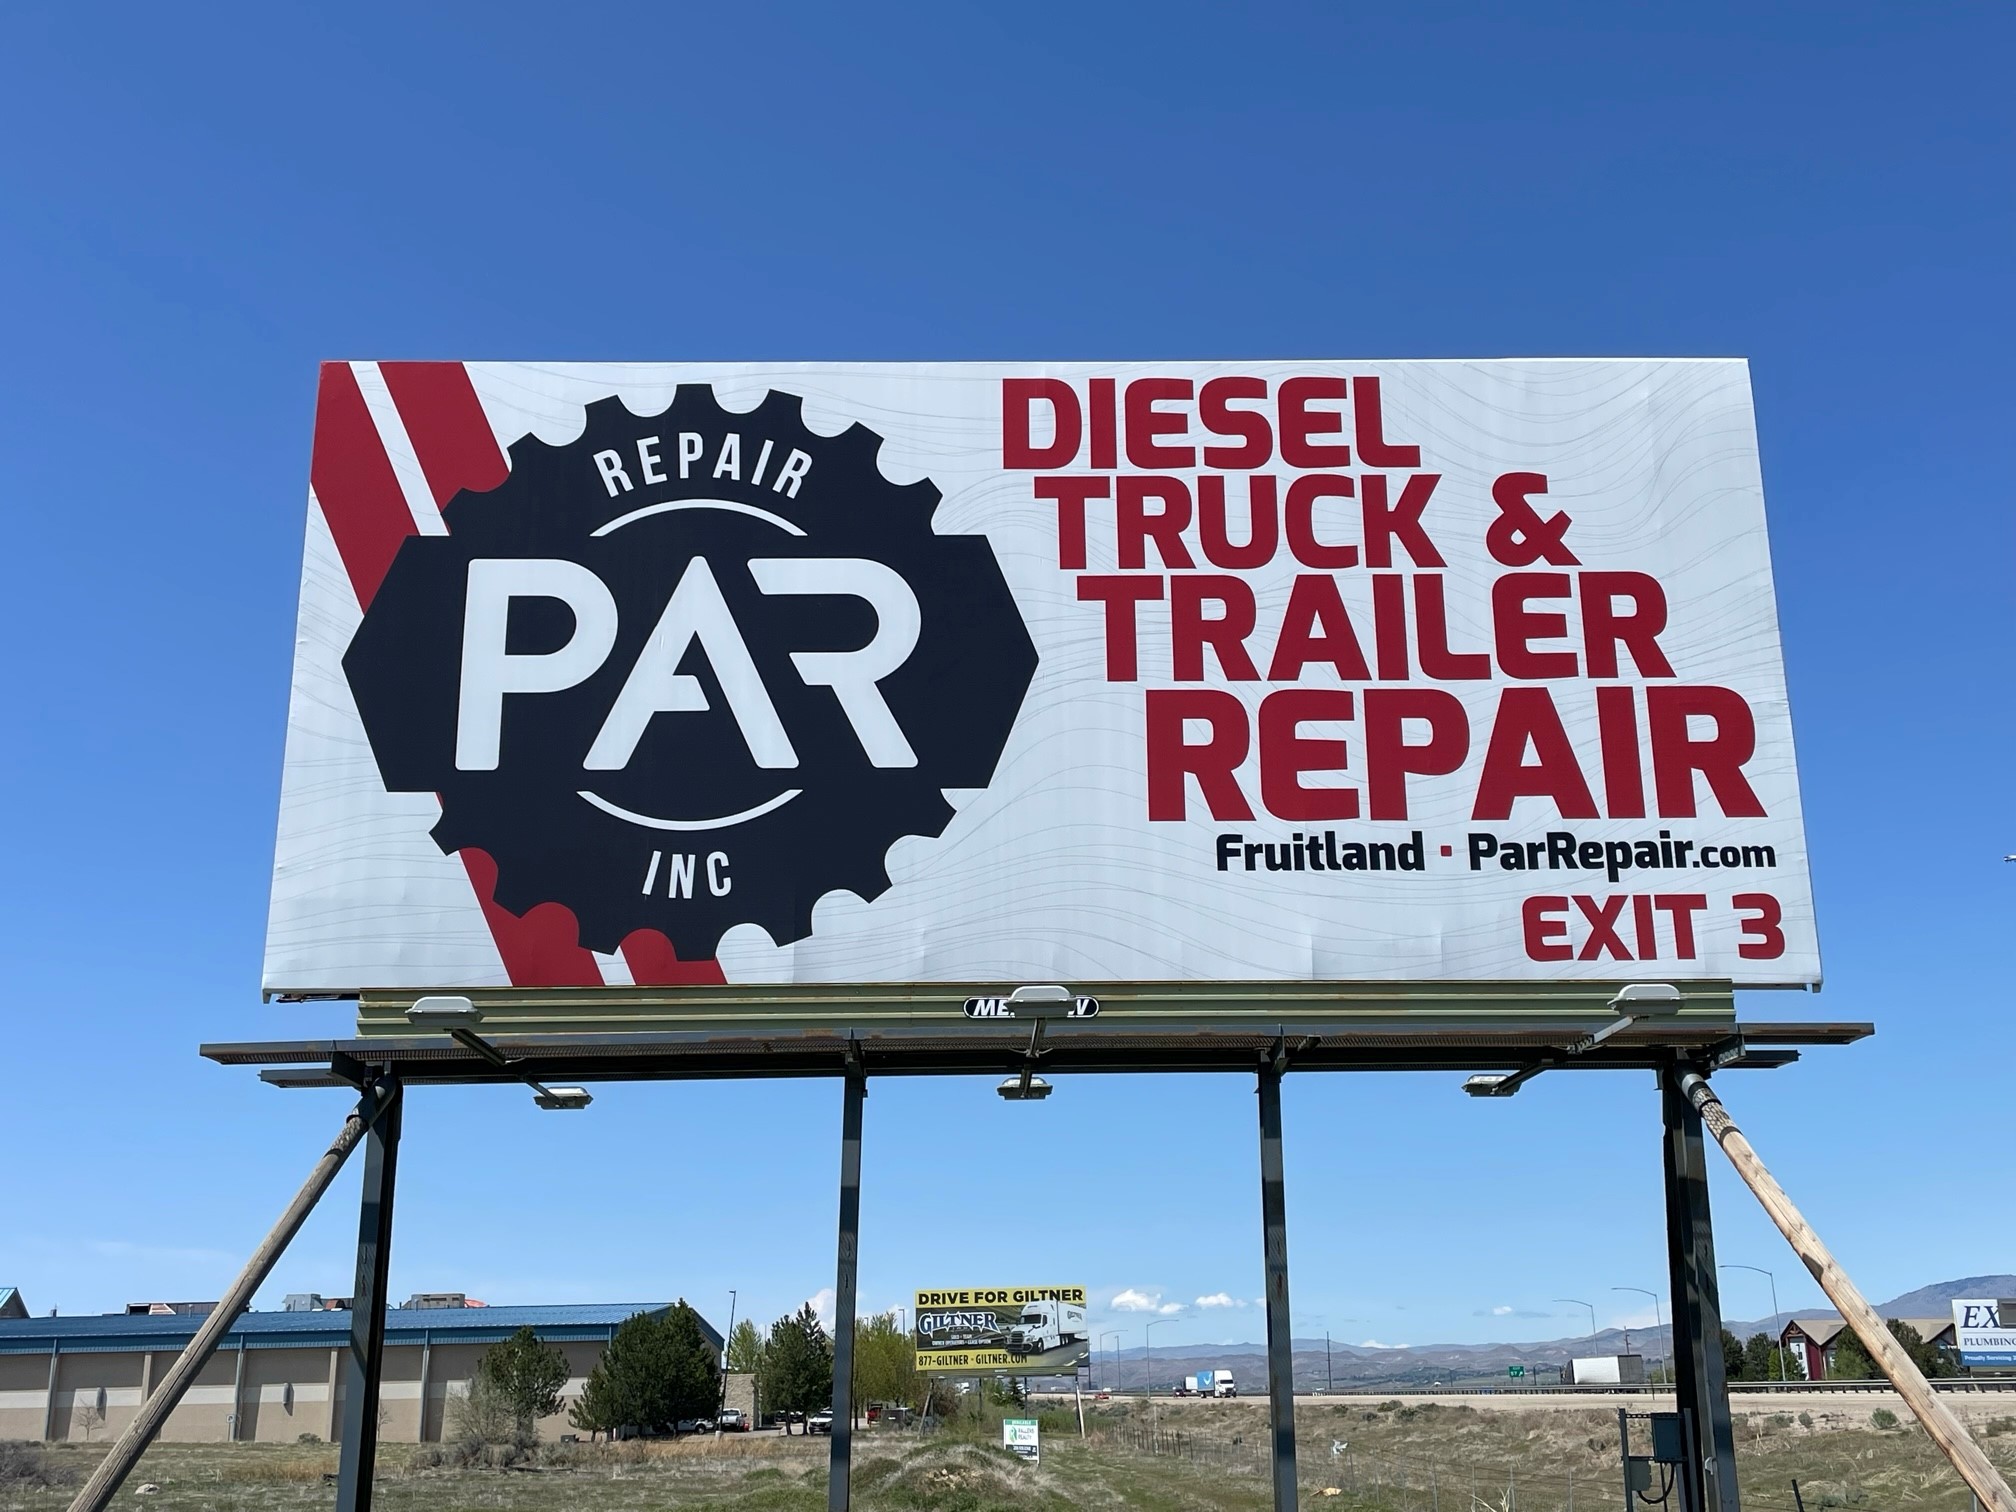 Meadow Outdoor billboard for PAR Repair that is red, white, and black